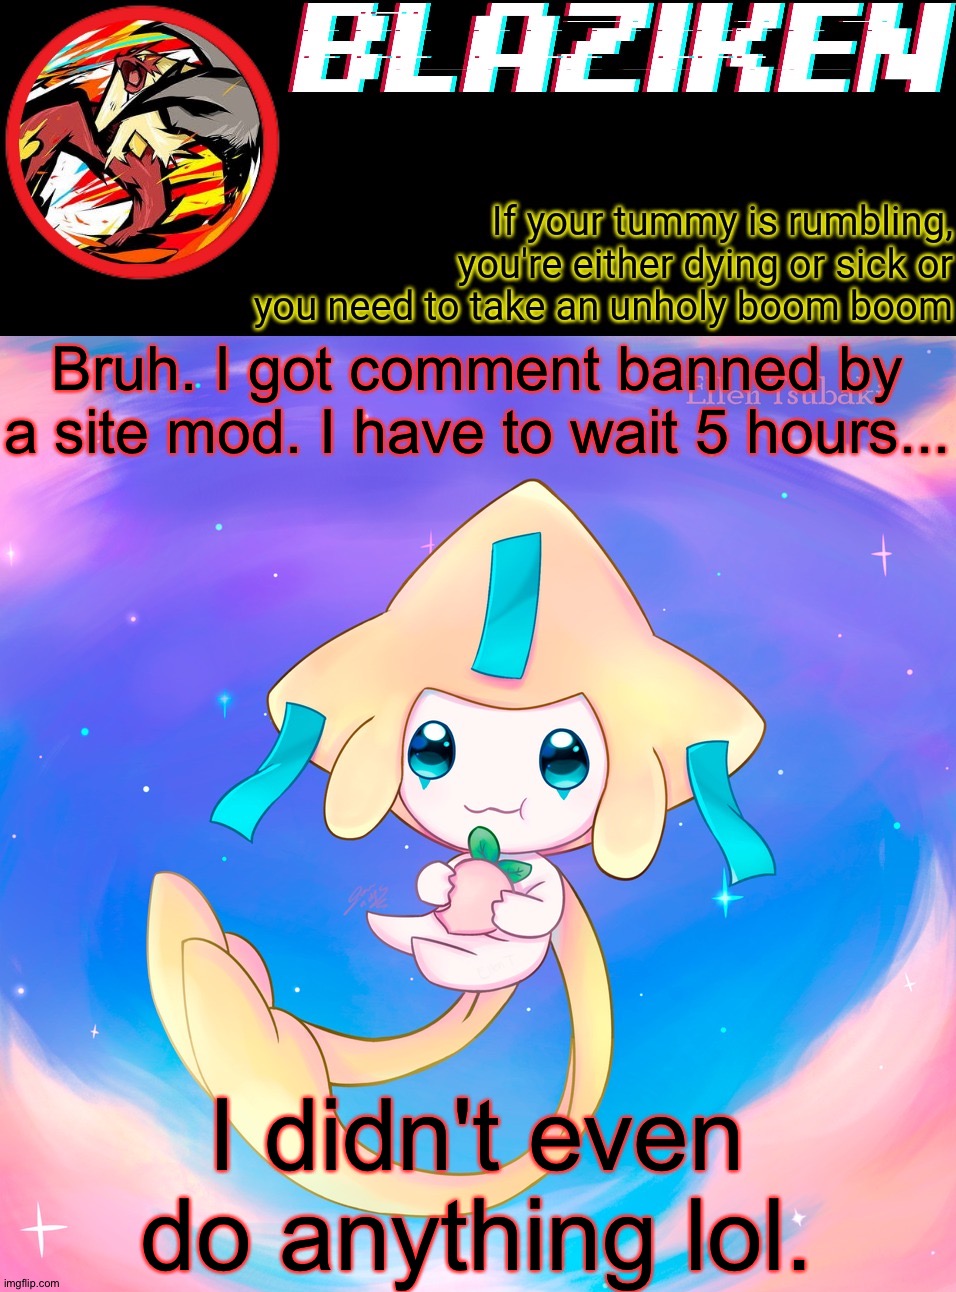 Blaziken's jirachi temp | Bruh. I got comment banned by a site mod. I have to wait 5 hours... I didn't even do anything lol. | image tagged in blaziken's jirachi temp | made w/ Imgflip meme maker